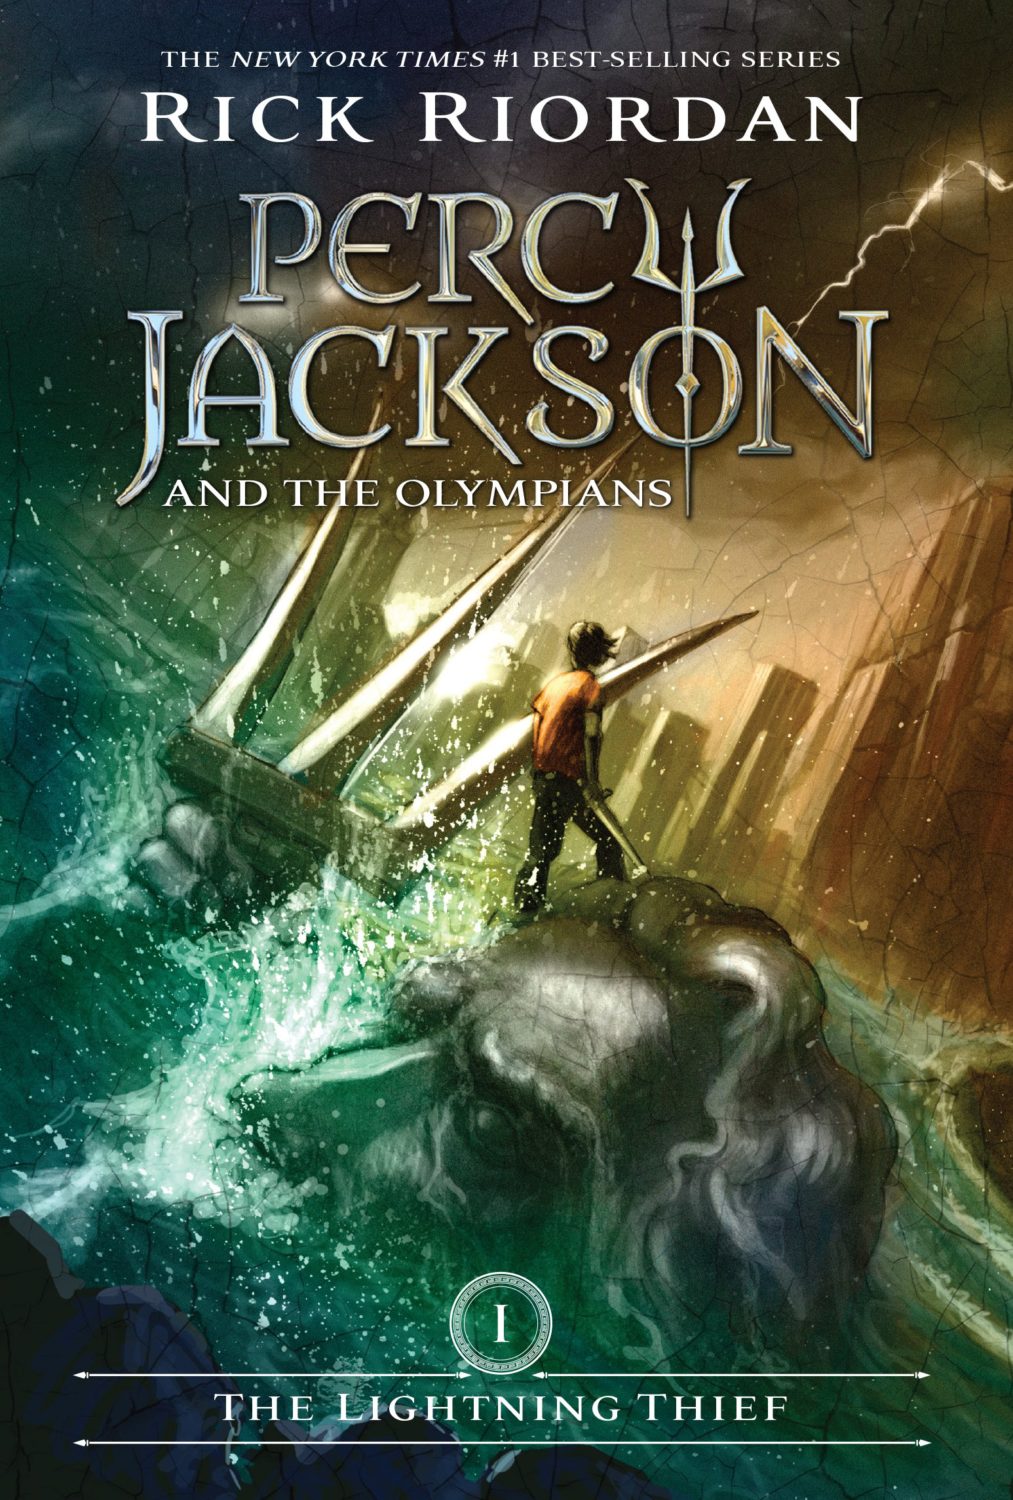 Percy Jackson and more family audiobooks for road trips